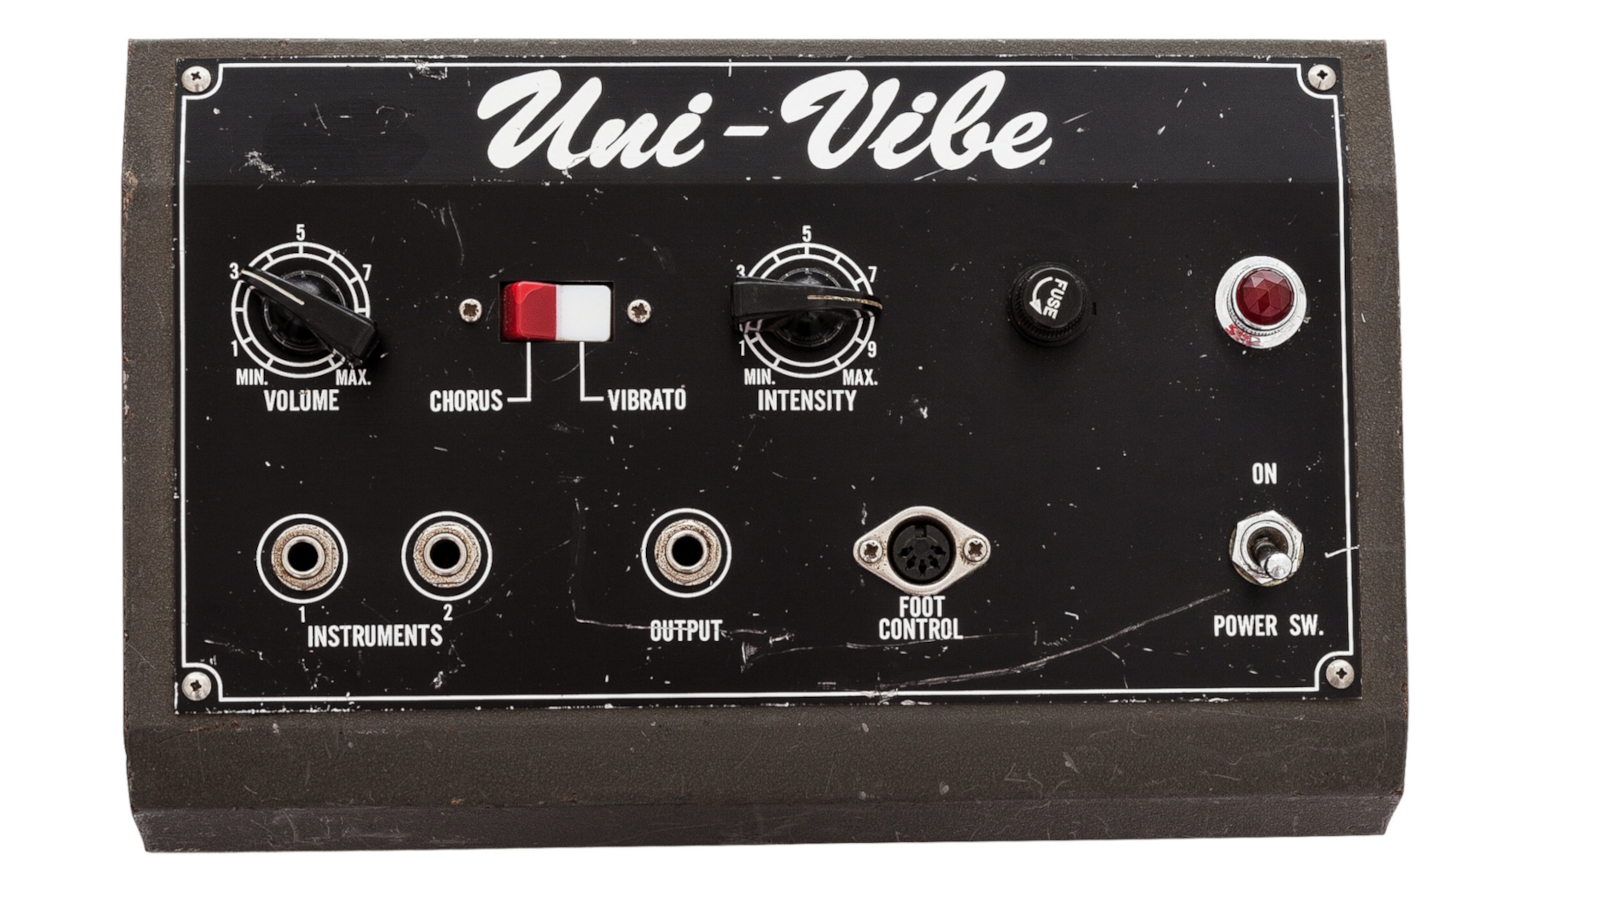 The Univox Uni-Vibe was the Final Stompbox to Land in Hendrix's Effects | GuitarPlayer